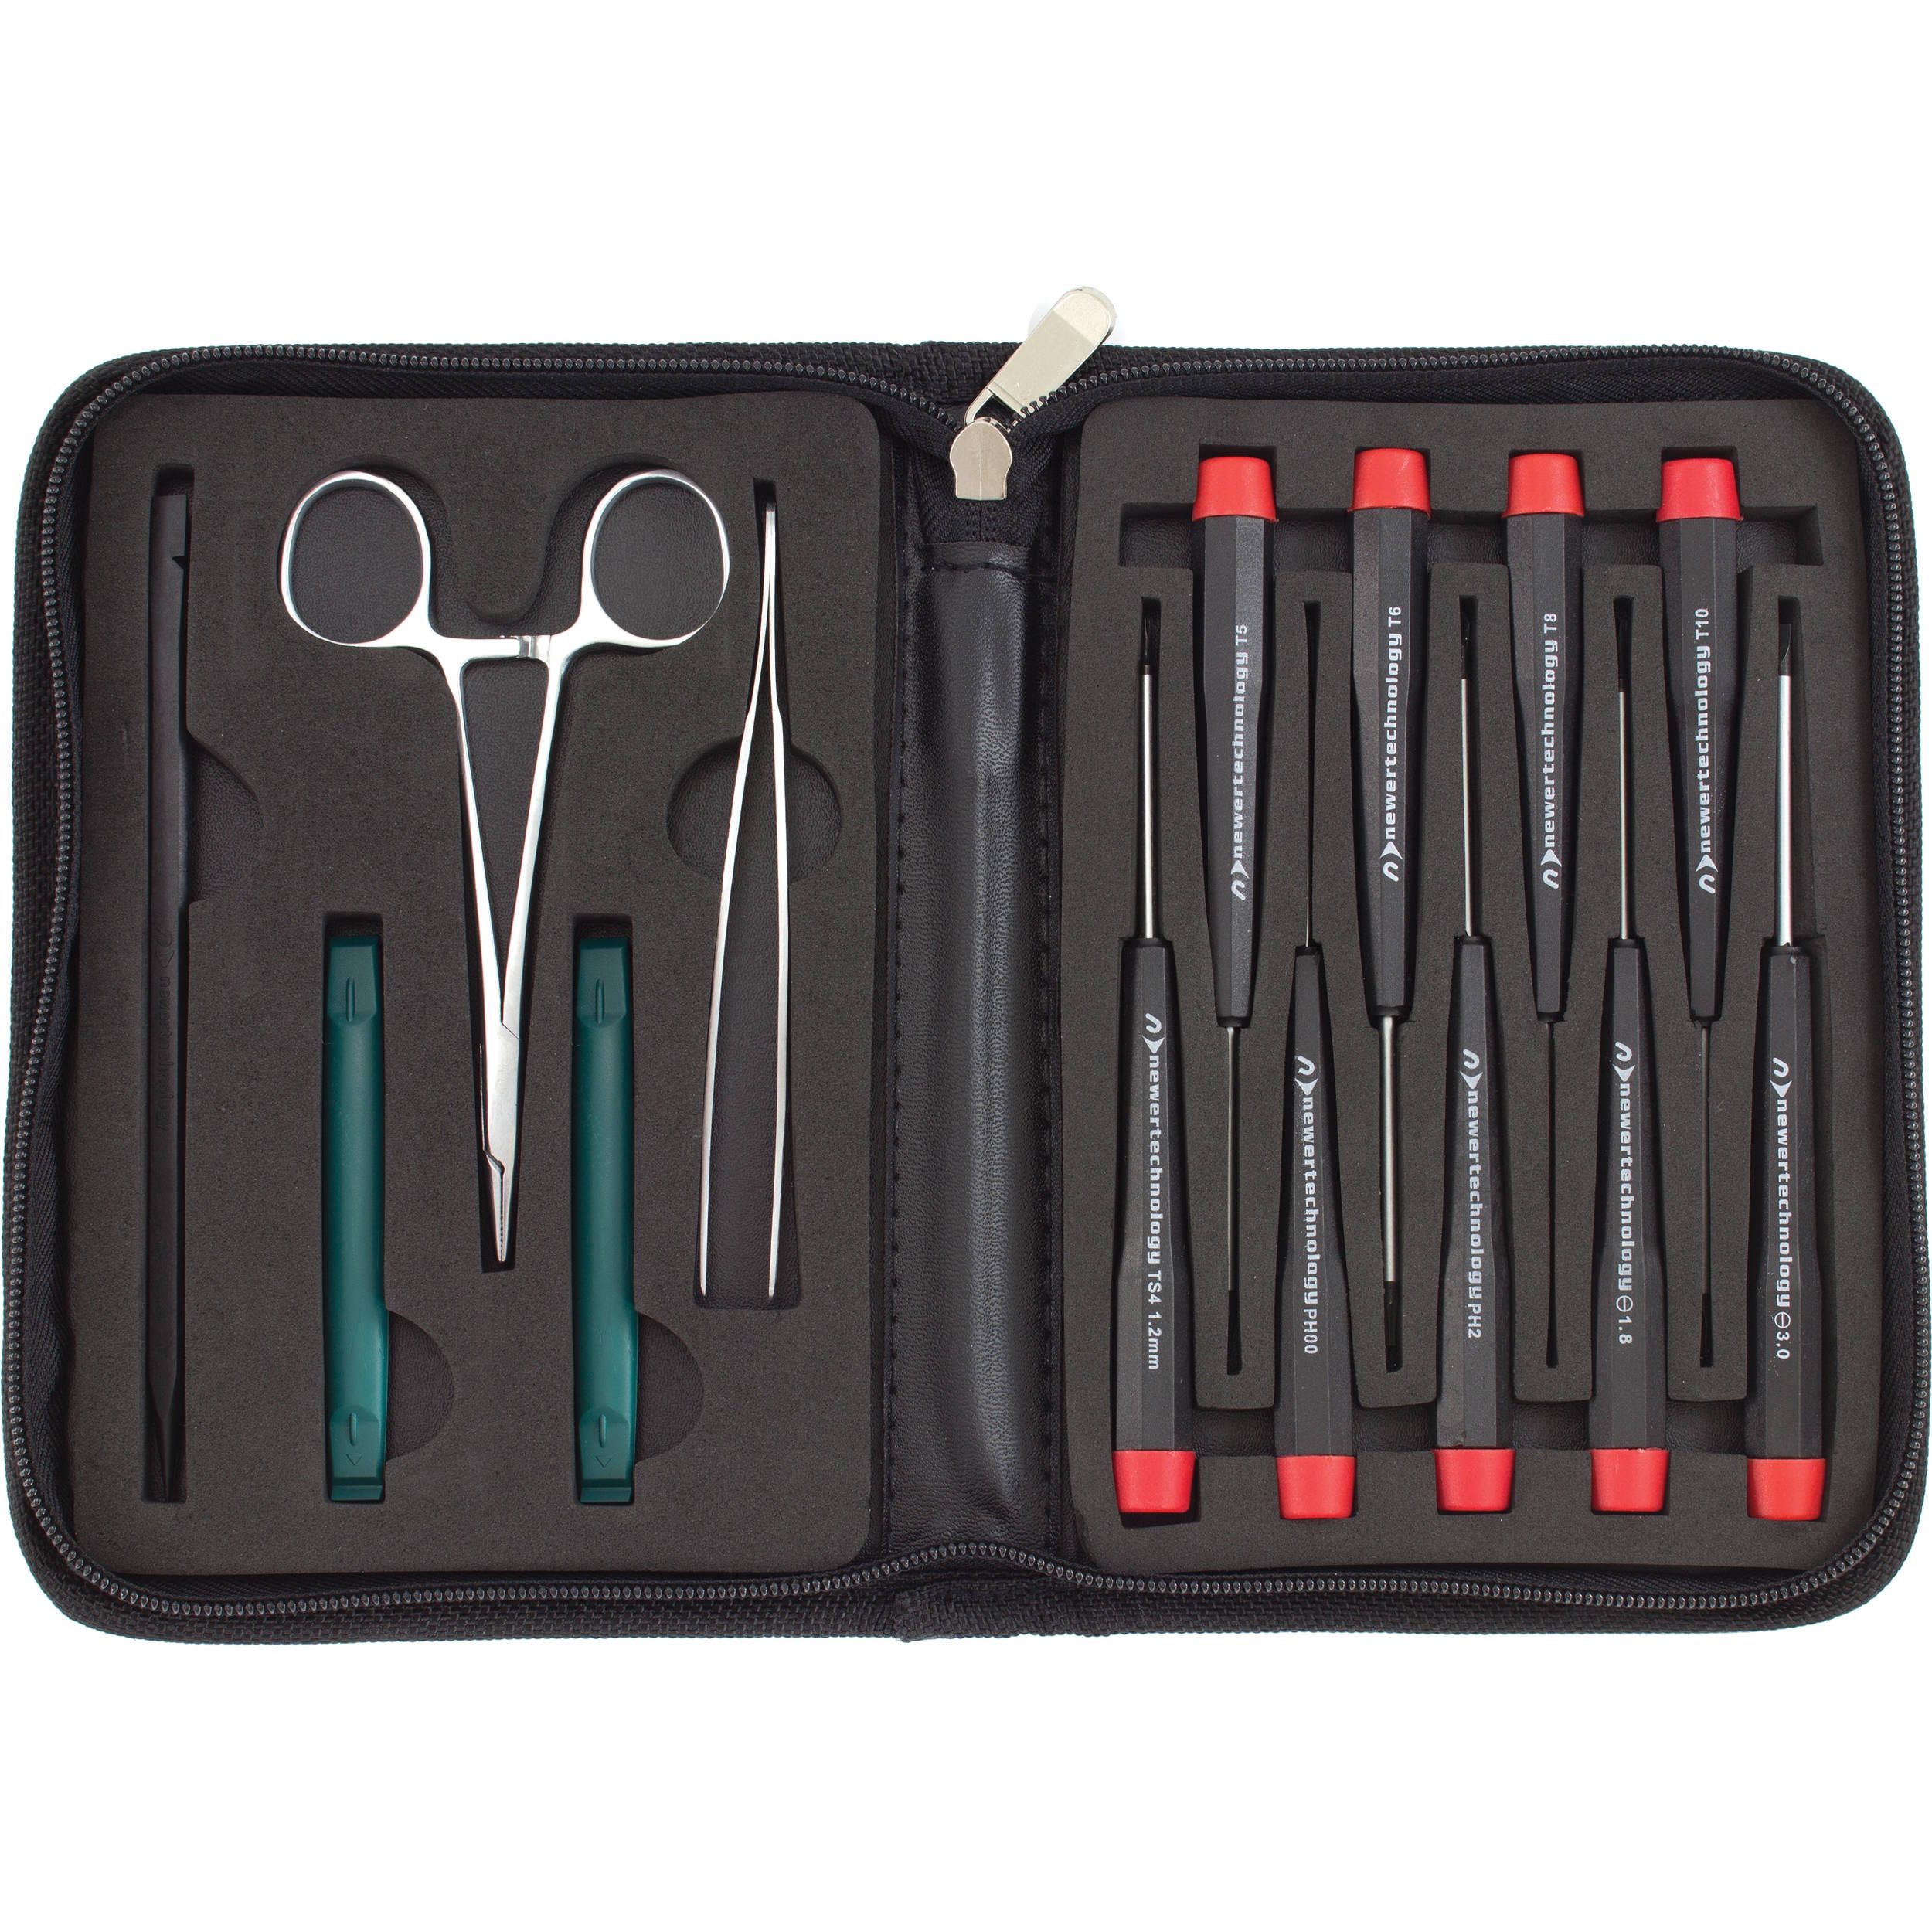 owc-14-piece-portable-toolkit-1-image